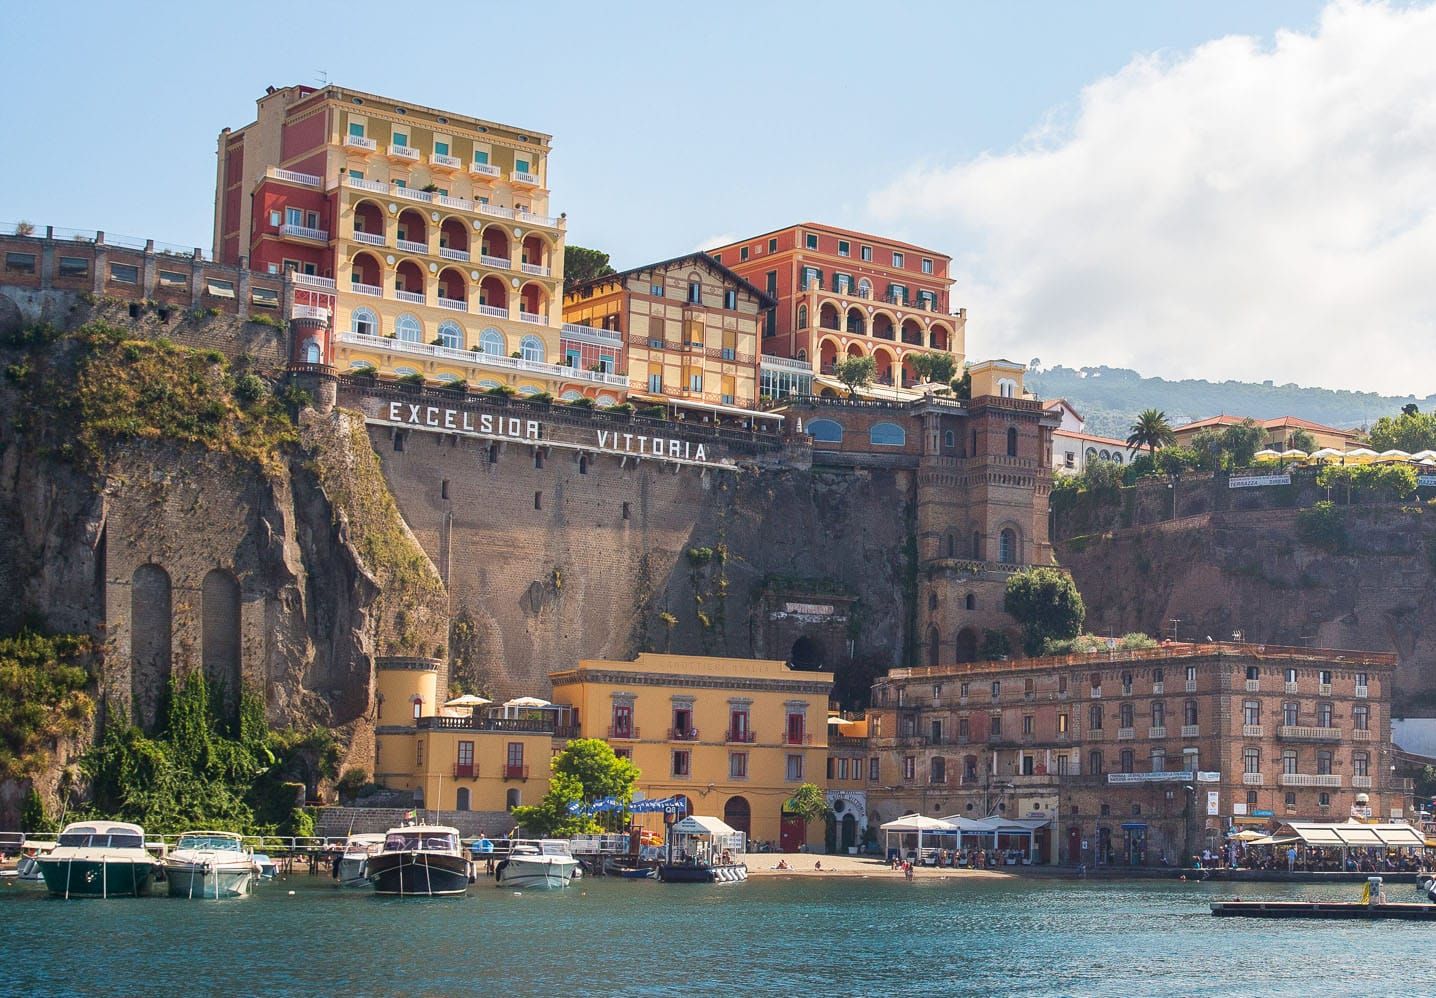 Excelsior Vittoria | Where to Stay on the Amalfi Coast